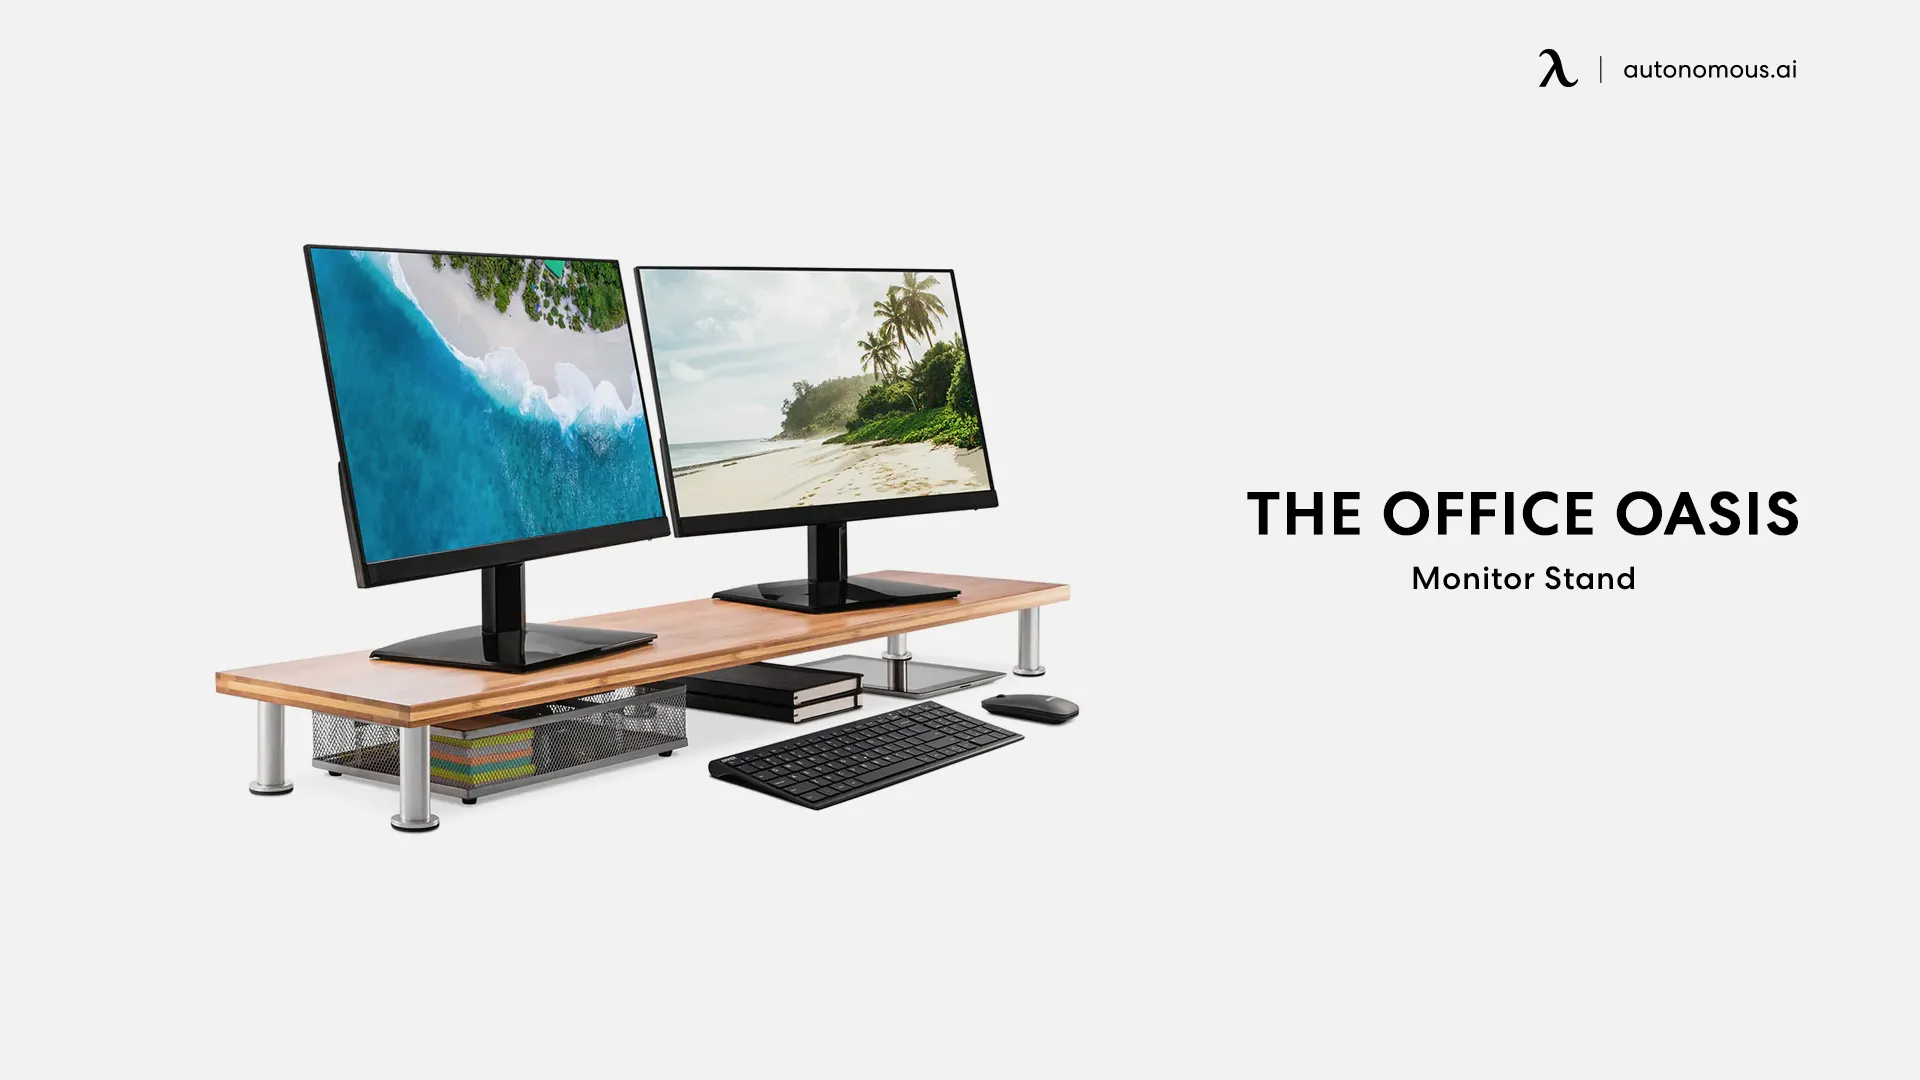 The Office Oasis Dual Premium Computer Monitor Stand: Built to Last